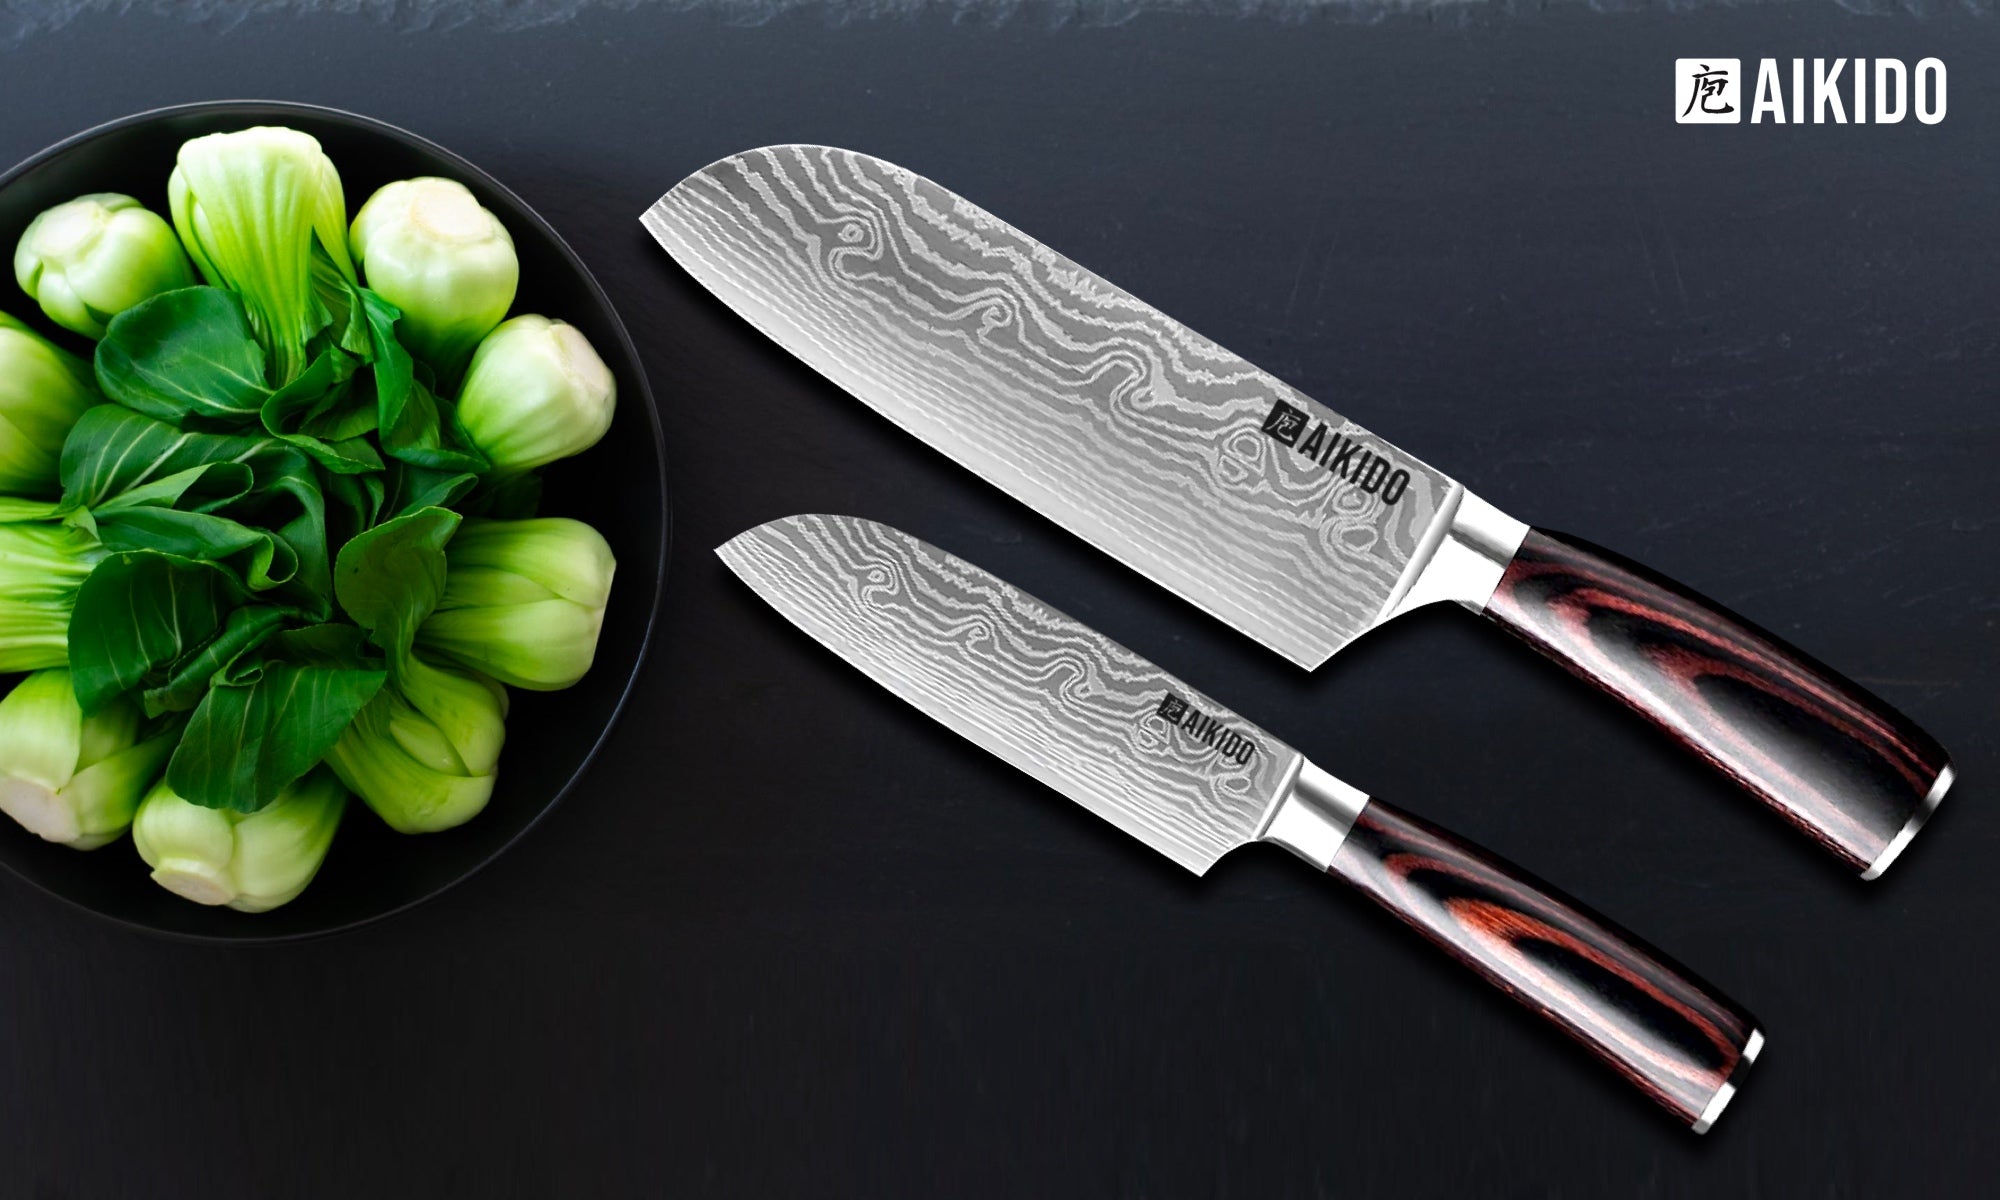 5 pc Chef Knife Set - Stainless Steel